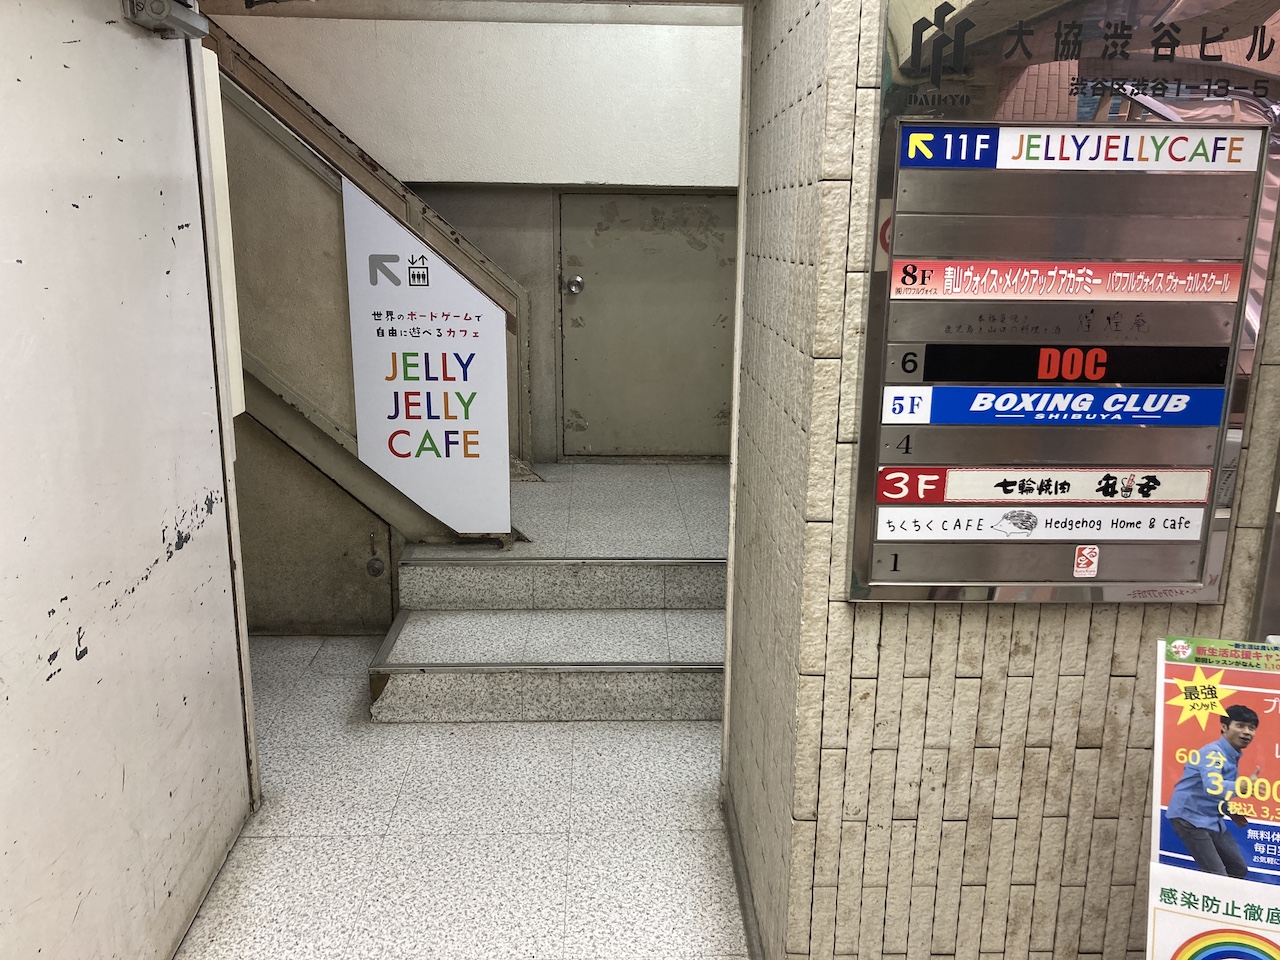 JELLY JELLY CAFE 渋谷2号店の行きかた